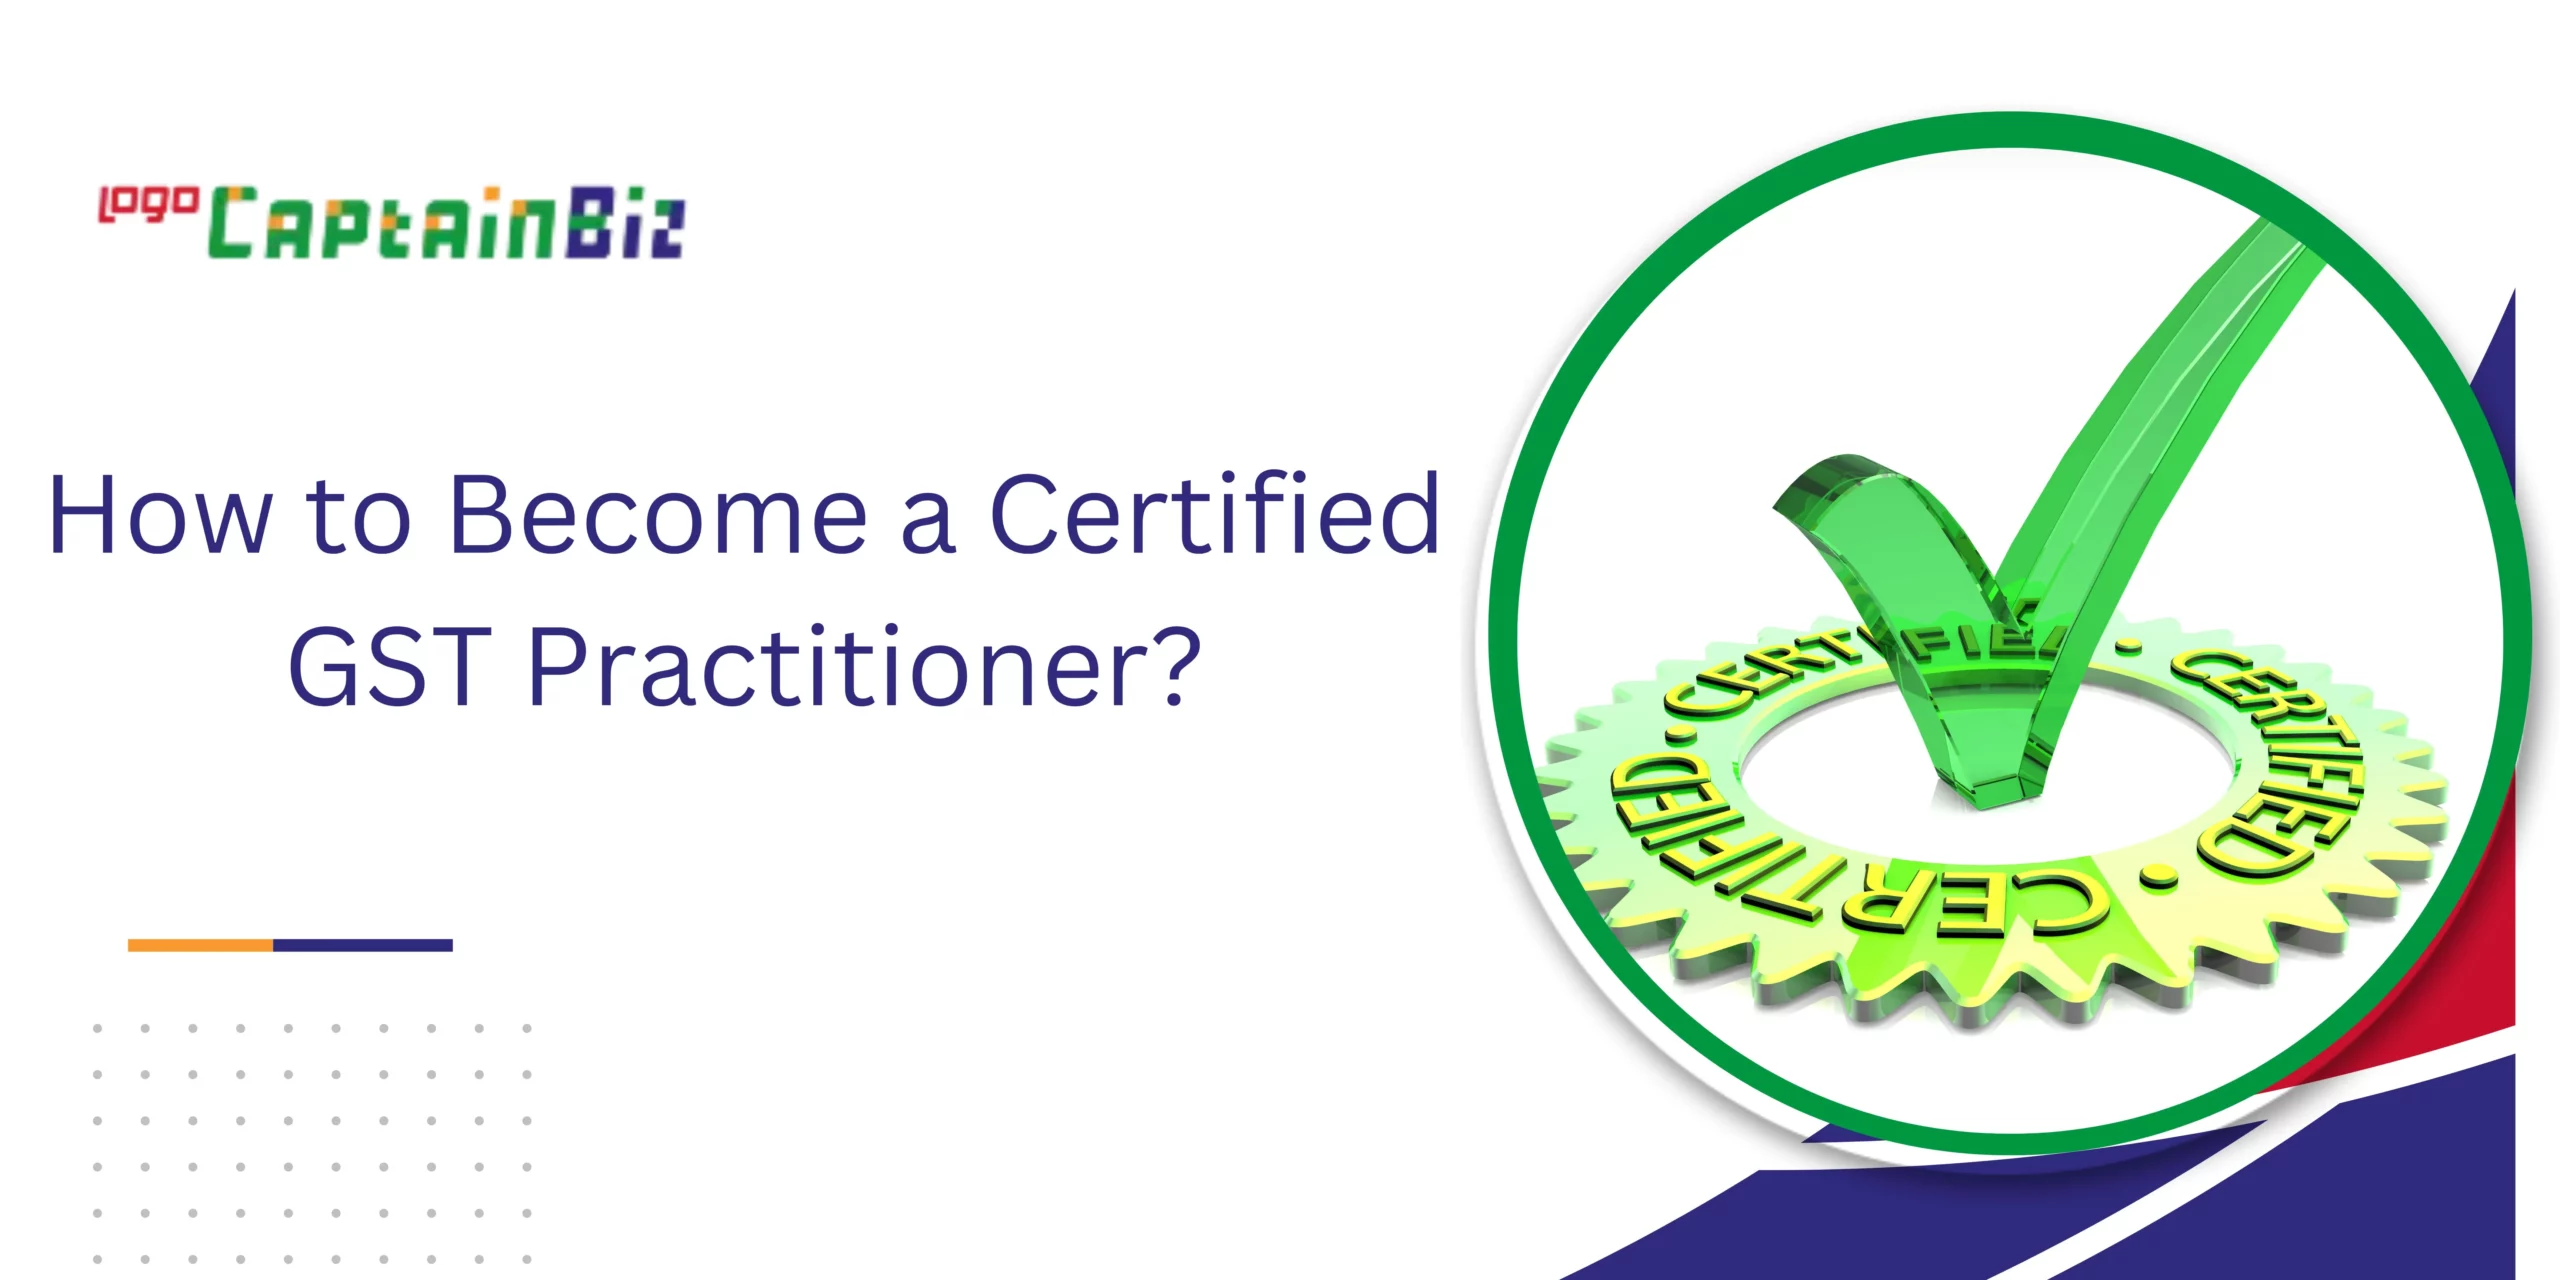 CaptainBiz: How to Become a Certified GST Practitioner